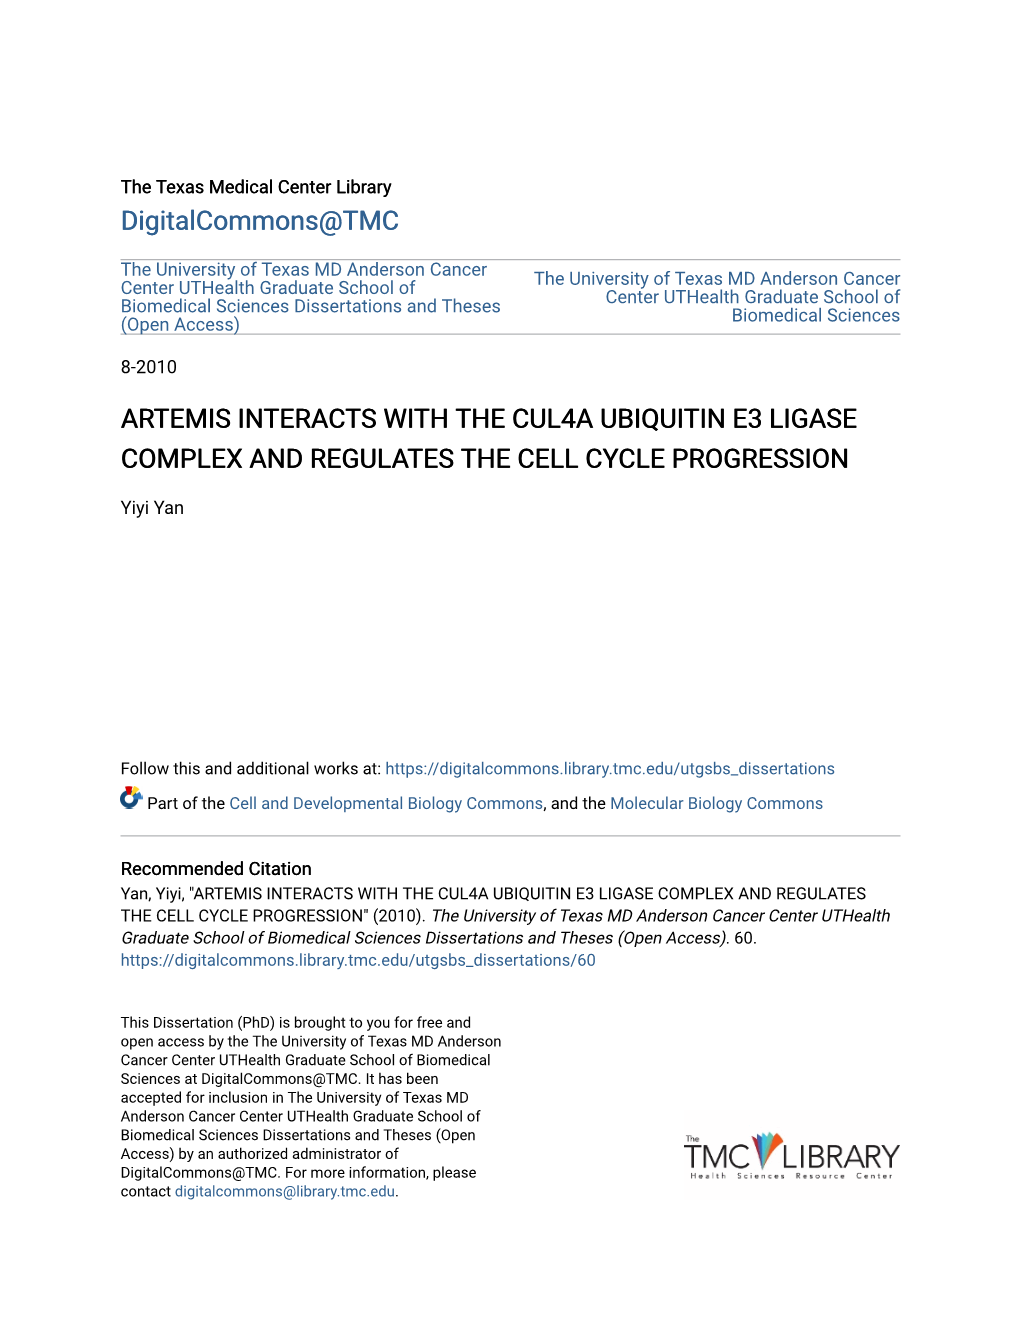 Artemis Interacts with the Cul4a Ubiquitin E3 Ligase Complex and Regulates the Cell Cycle Progression